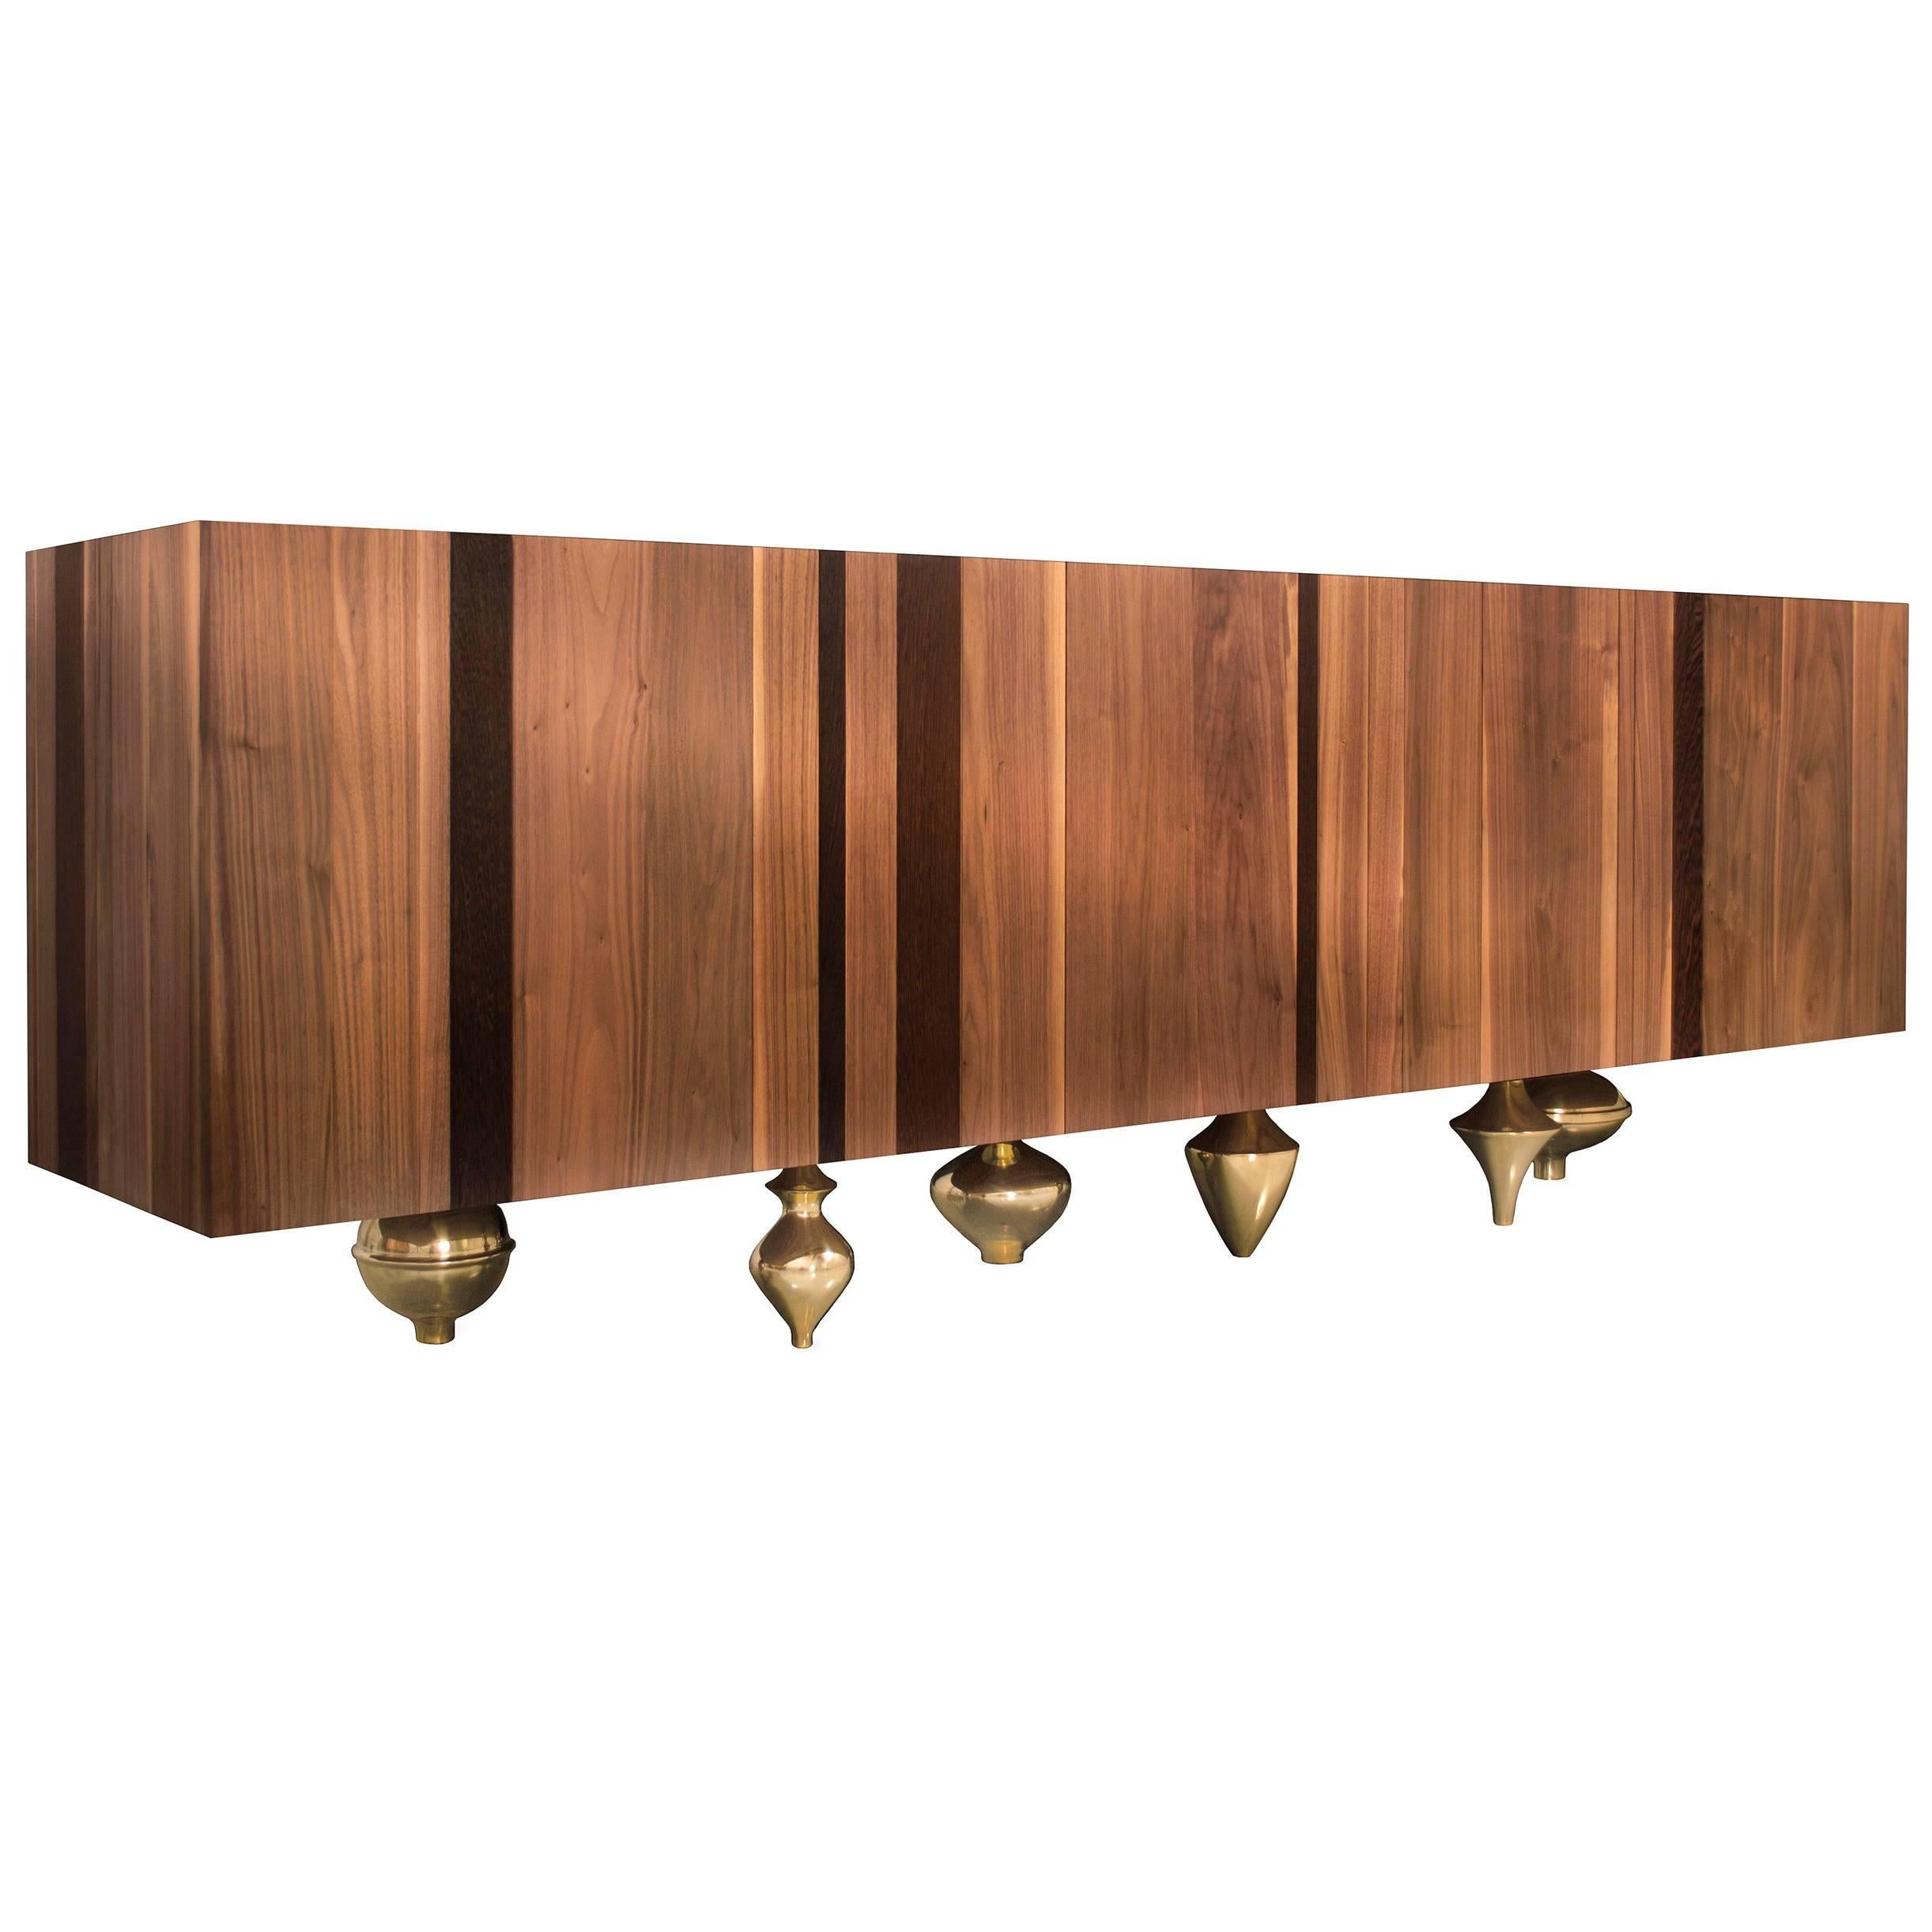 "Il Pezzo 1 Credenza" modern buffet in solid walnut and wenge with marble top